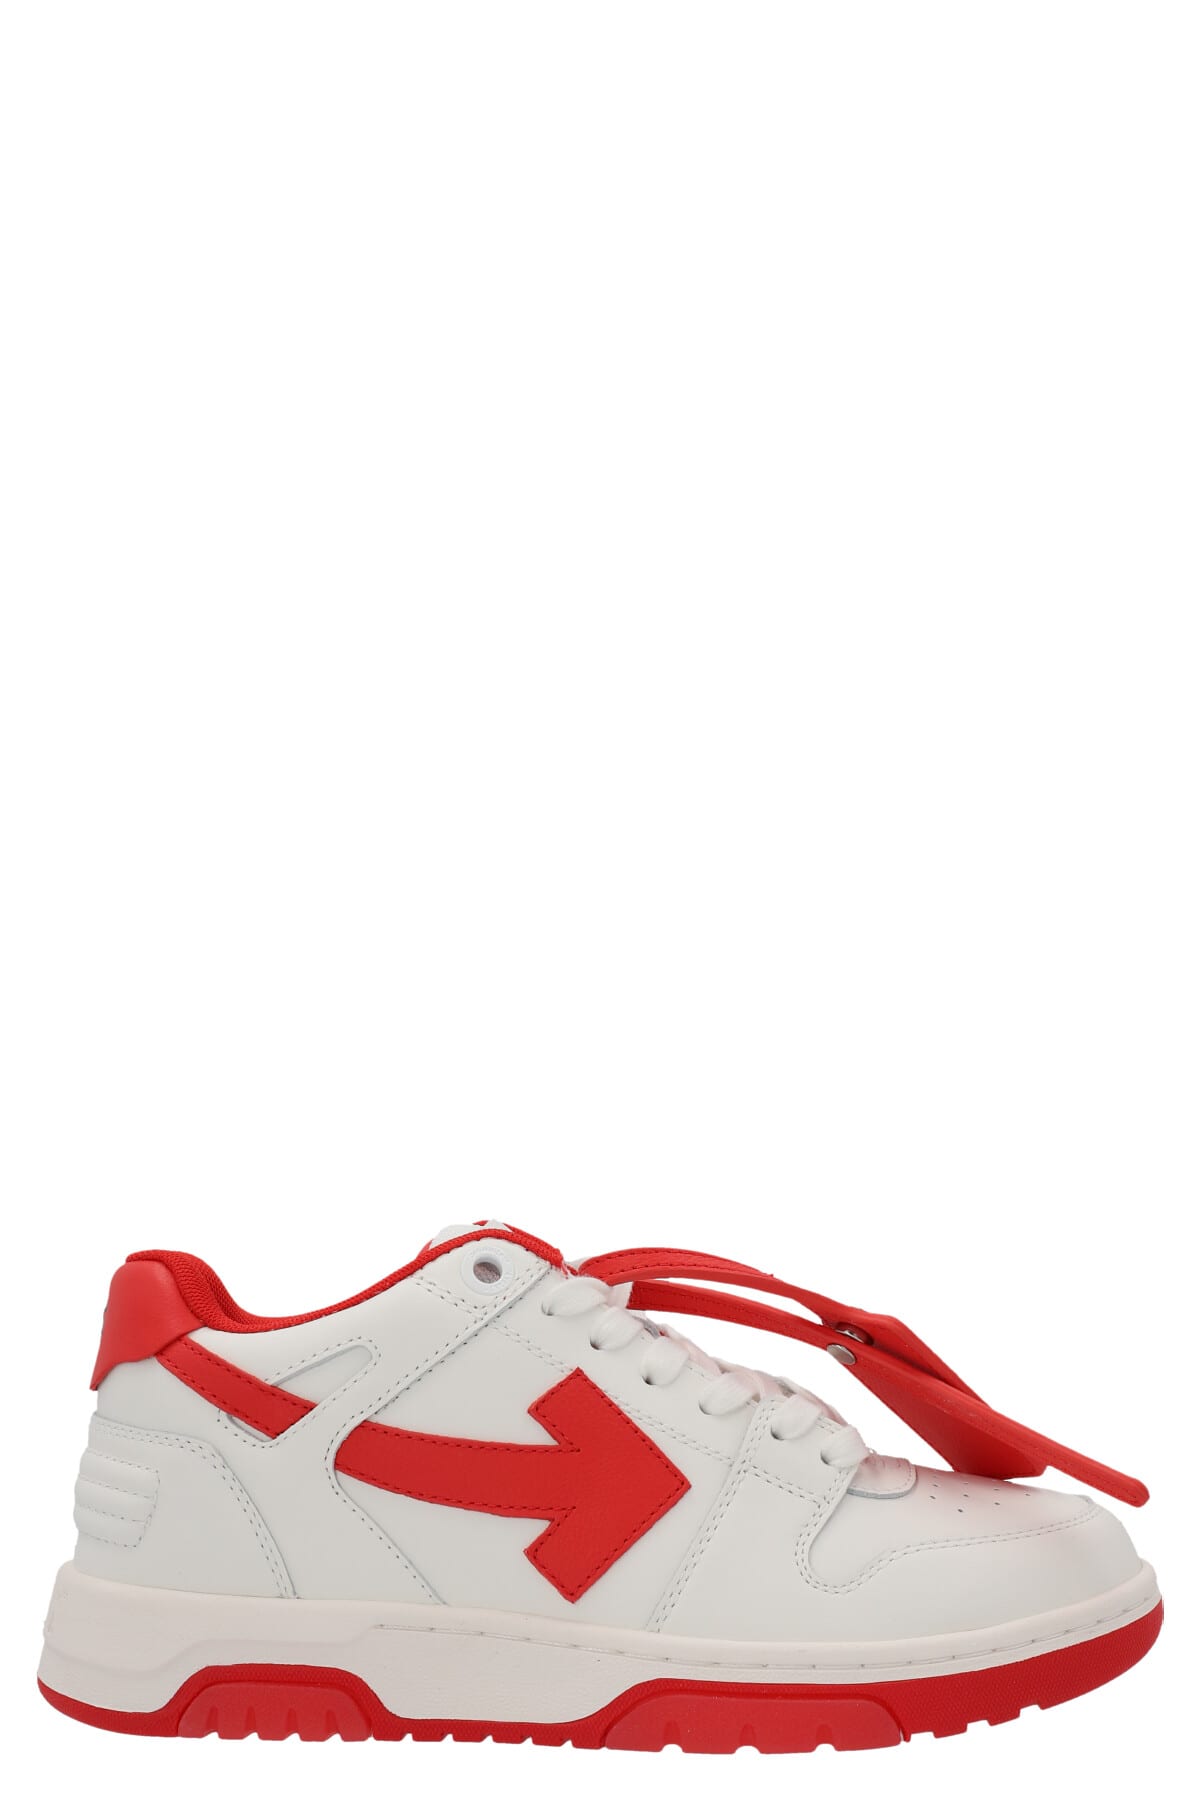 OFF-WHITE OUT OF OFFICE SNEAKERS